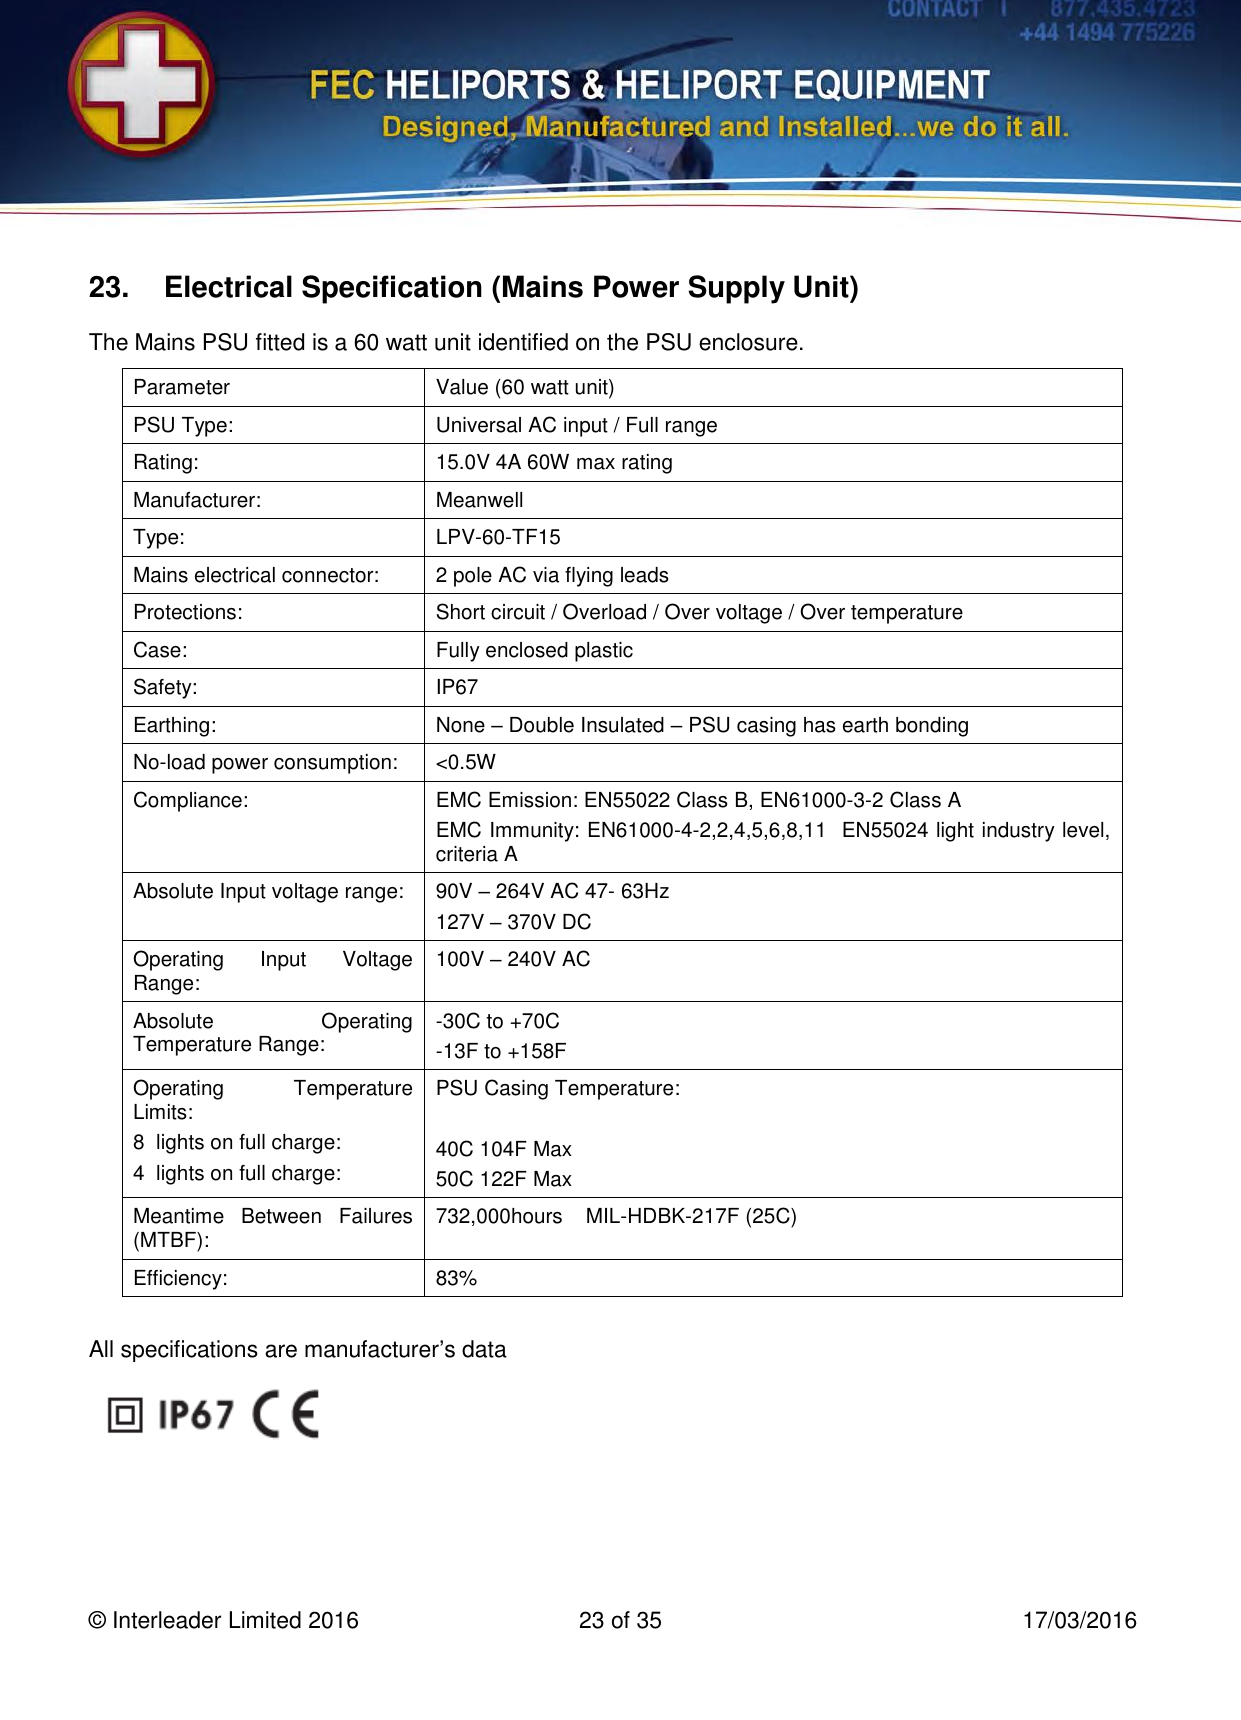   © Interleader Limited 2016  23 of 35  17/03/2016 23.  Electrical Specification (Mains Power Supply Unit) The Mains PSU fitted is a 60 watt unit identified on the PSU enclosure. Parameter Value (60 watt unit) PSU Type: Universal AC input / Full range Rating: 15.0V 4A 60W max rating Manufacturer: Meanwell Type:   LPV-60-TF15 Mains electrical connector: 2 pole AC via flying leads Protections: Short circuit / Overload / Over voltage / Over temperature Case: Fully enclosed plastic Safety: IP67 Earthing: None – Double Insulated – PSU casing has earth bonding No-load power consumption: &lt;0.5W Compliance: EMC Emission: EN55022 Class B, EN61000-3-2 Class A EMC Immunity: EN61000-4-2,2,4,5,6,8,11  EN55024 light industry level, criteria A Absolute Input voltage range: 90V – 264V AC 47- 63Hz 127V – 370V DC Operating  Input  Voltage Range: 100V – 240V AC Absolute  Operating Temperature Range: -30C to +70C -13F to +158F Operating  Temperature Limits: 8  lights on full charge: 4  lights on full charge: PSU Casing Temperature:  40C 104F Max 50C 122F Max Meantime  Between  Failures (MTBF): 732,000hours  MIL-HDBK-217F (25C) Efficiency: 83%    All specifications are manufacturer’s data     